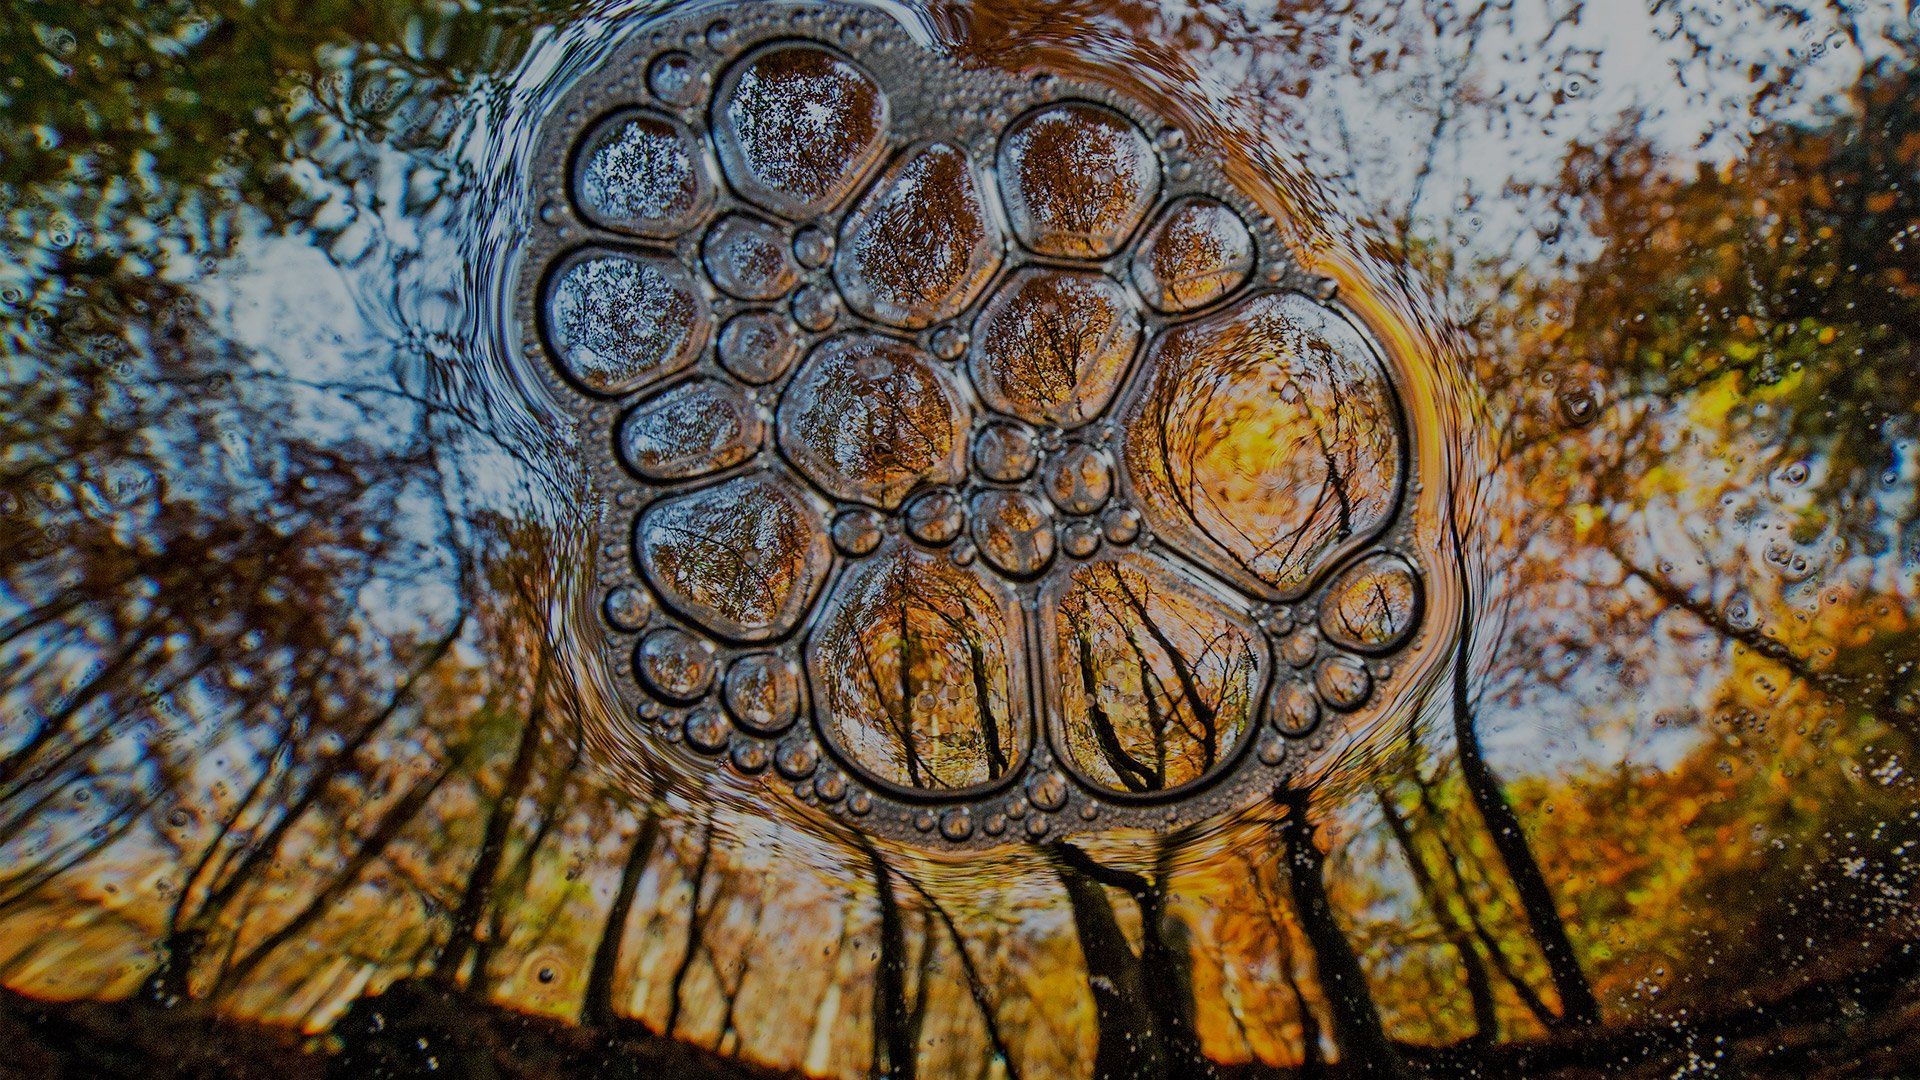 A view from underwater of encircling trees, with the scene reflected in a mass of bubbles.